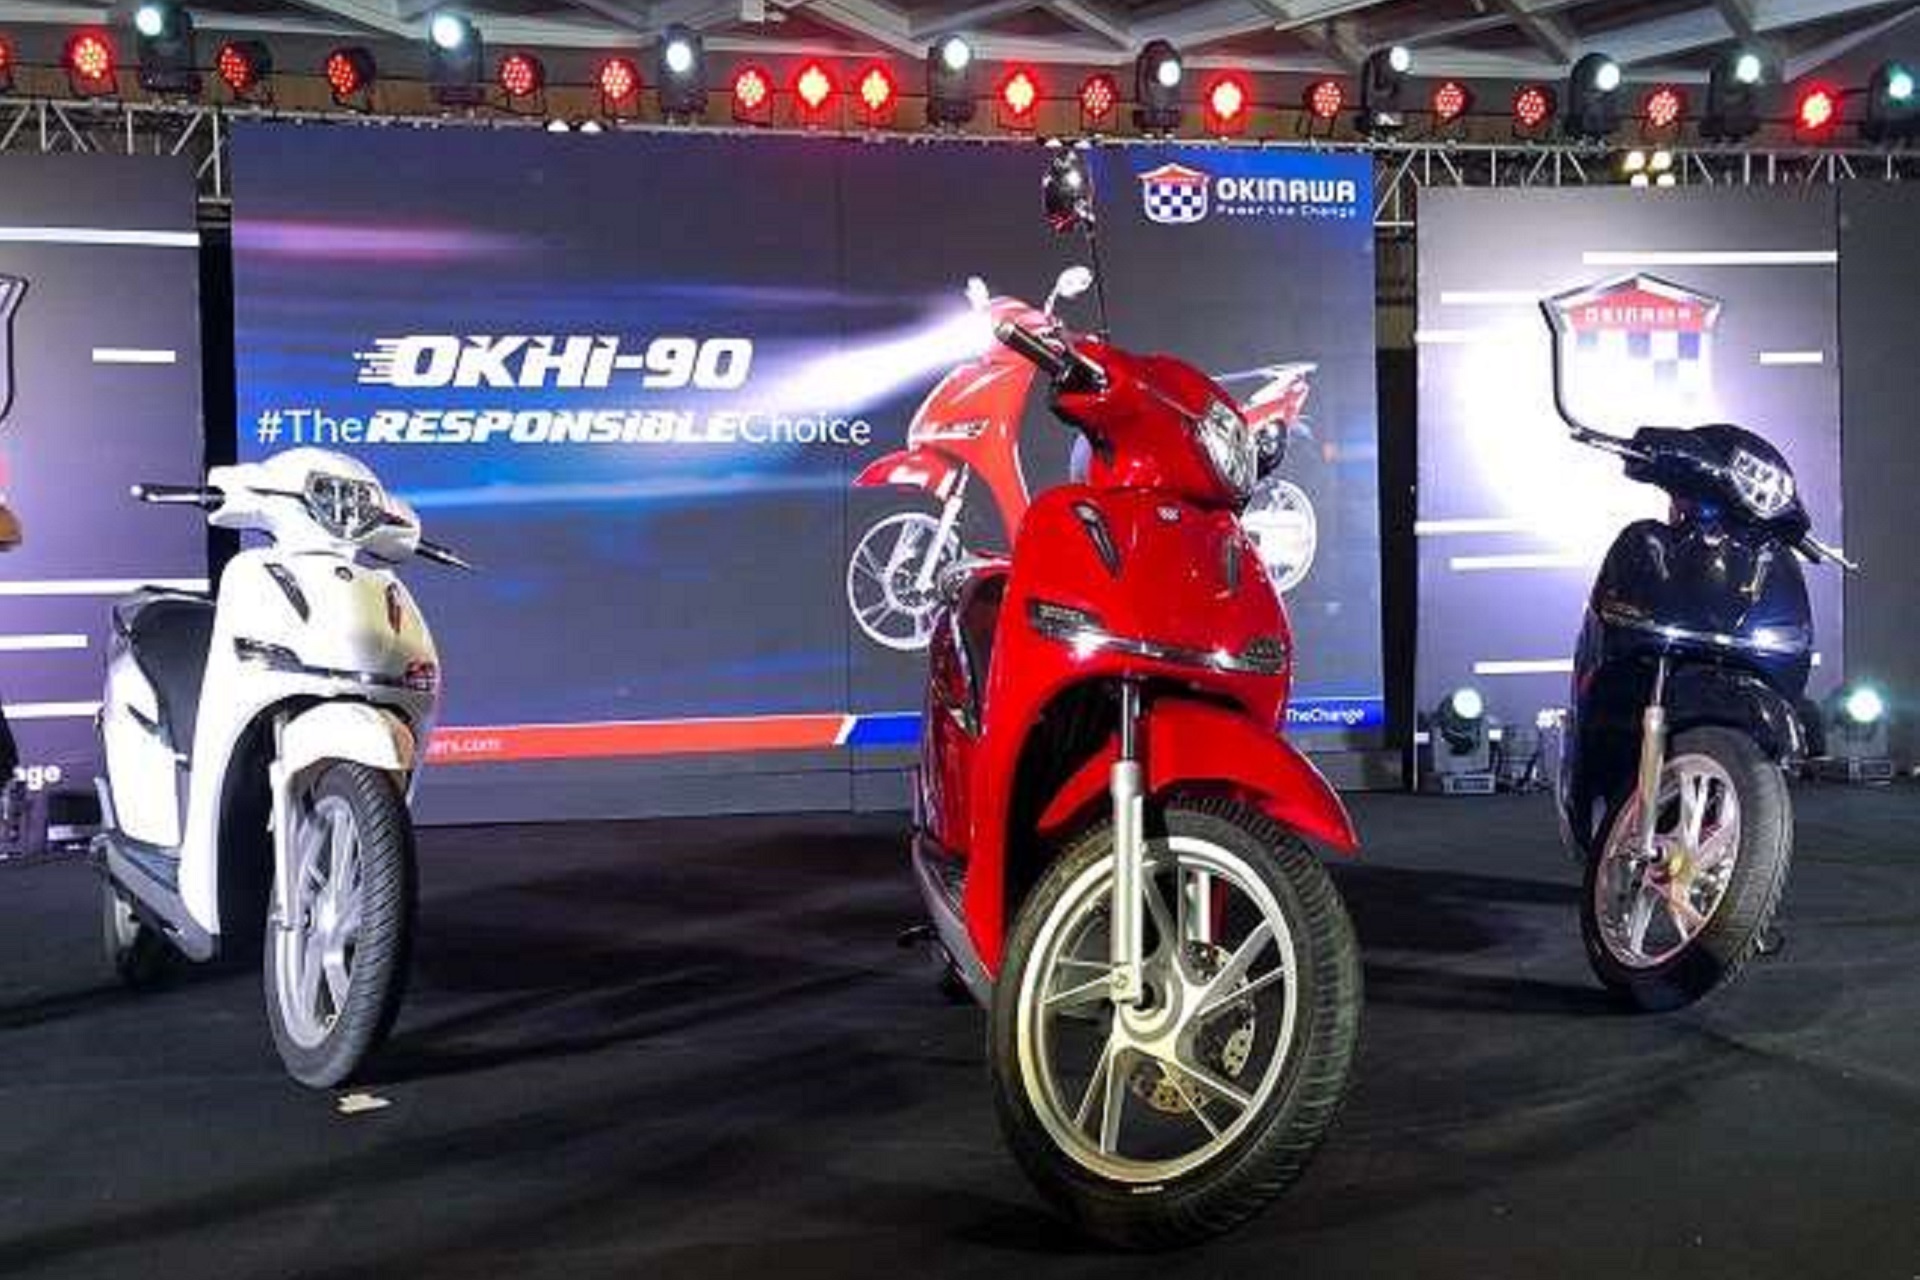 Okinawa Emerges As The Biggest Electric Two-Wheeler Manufacturer In India